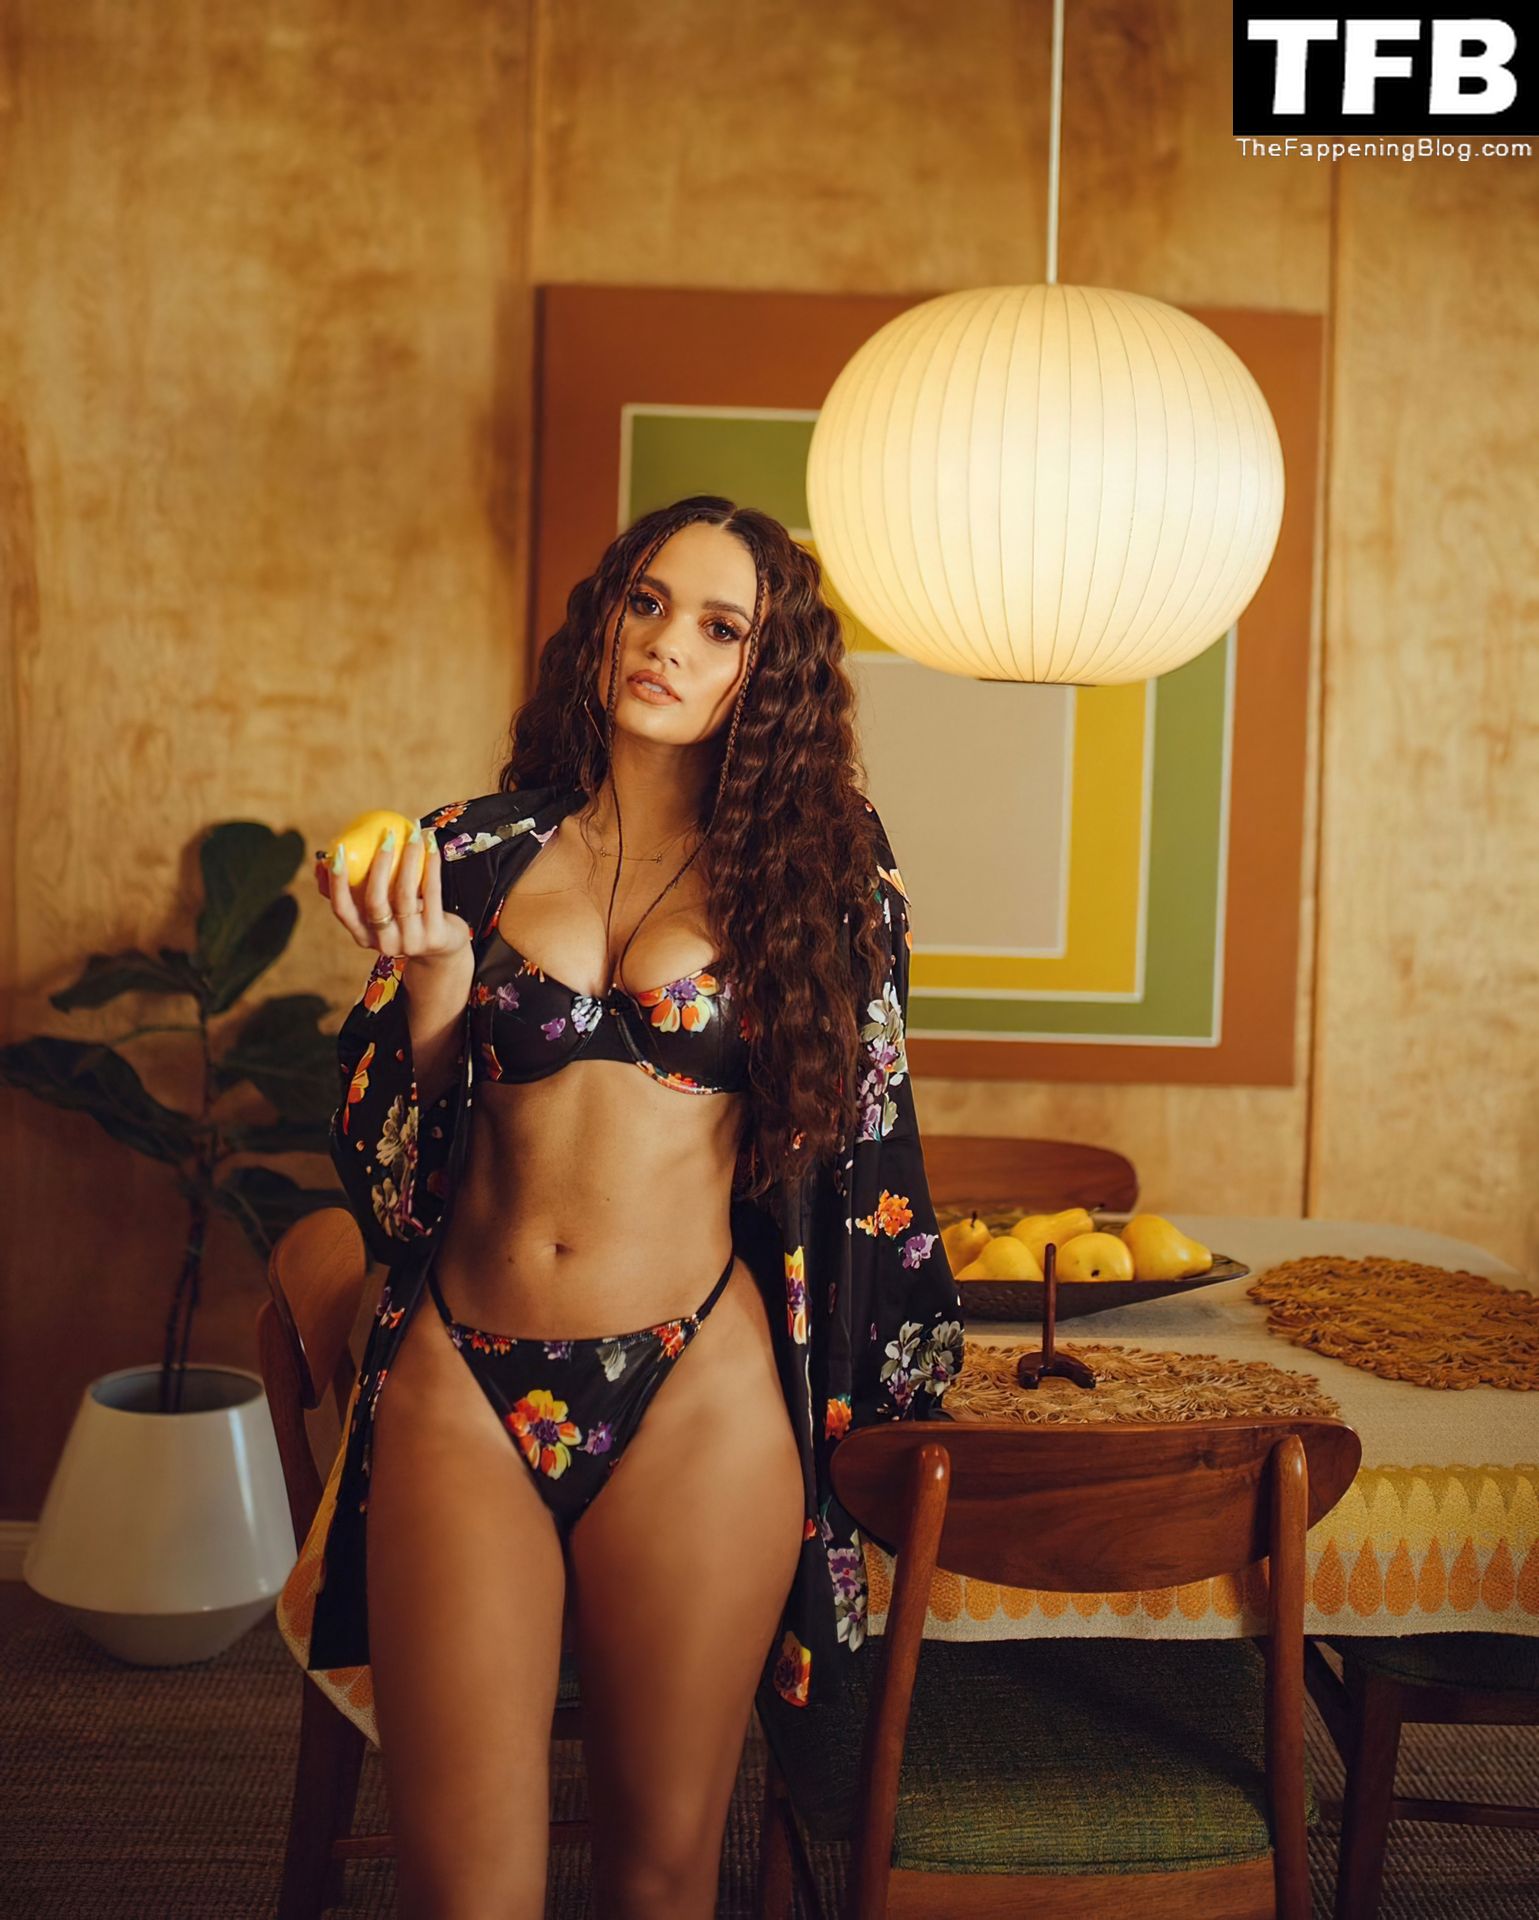 Madison-Pettis-Sexy-Boobs-in-Lingerie-1-1-thefappeningblog.com_.jpg